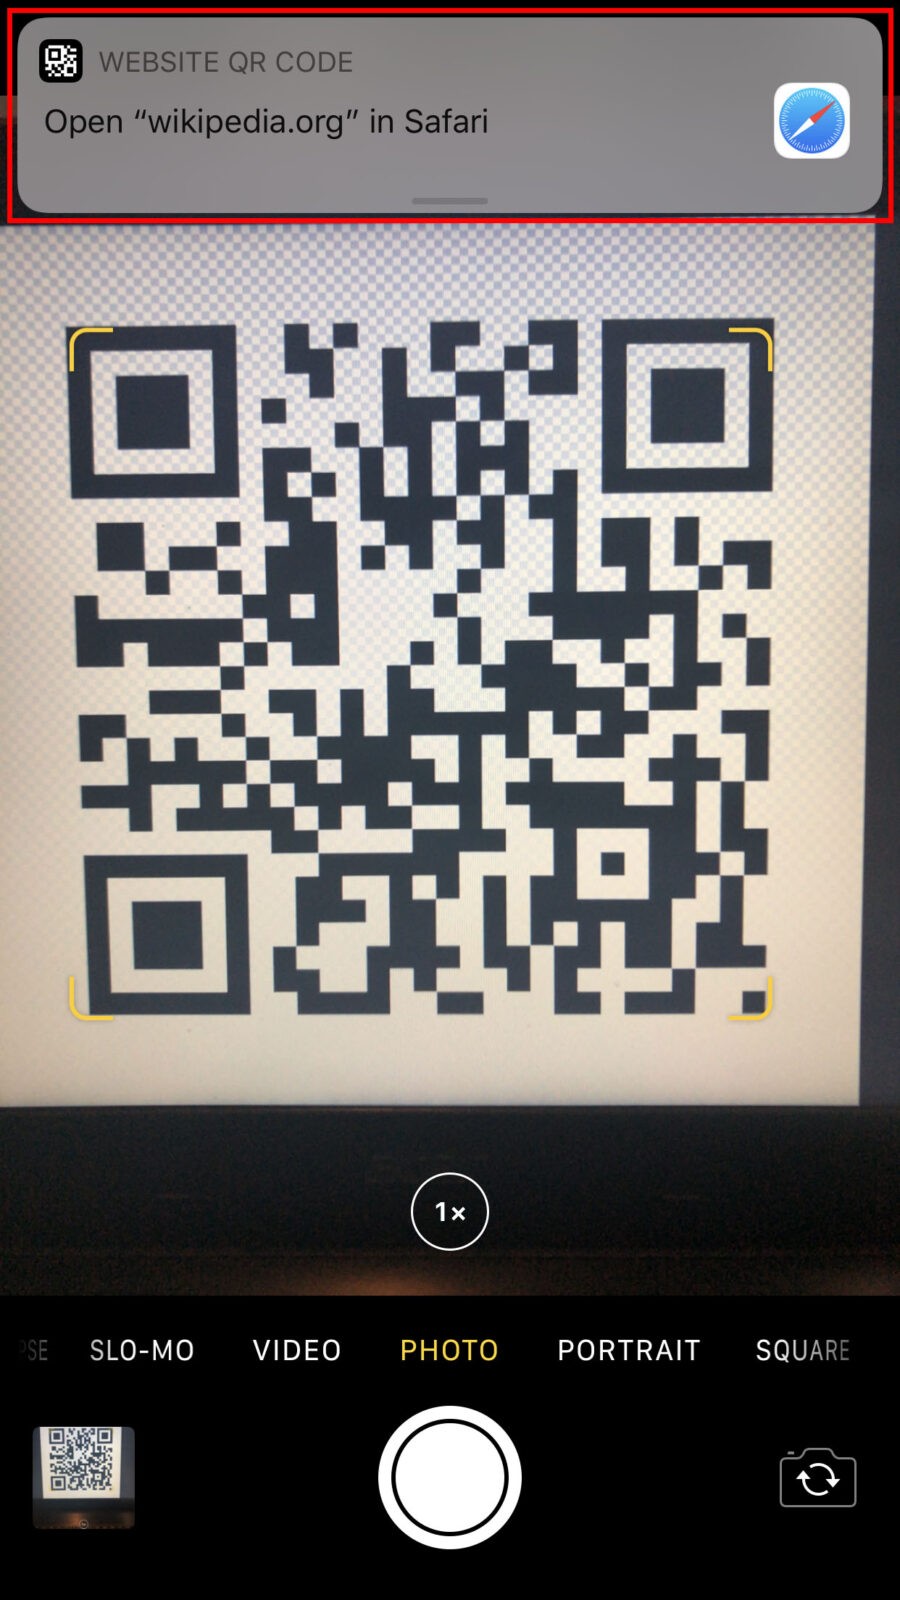 How to Scan a QR Code on an iPhone